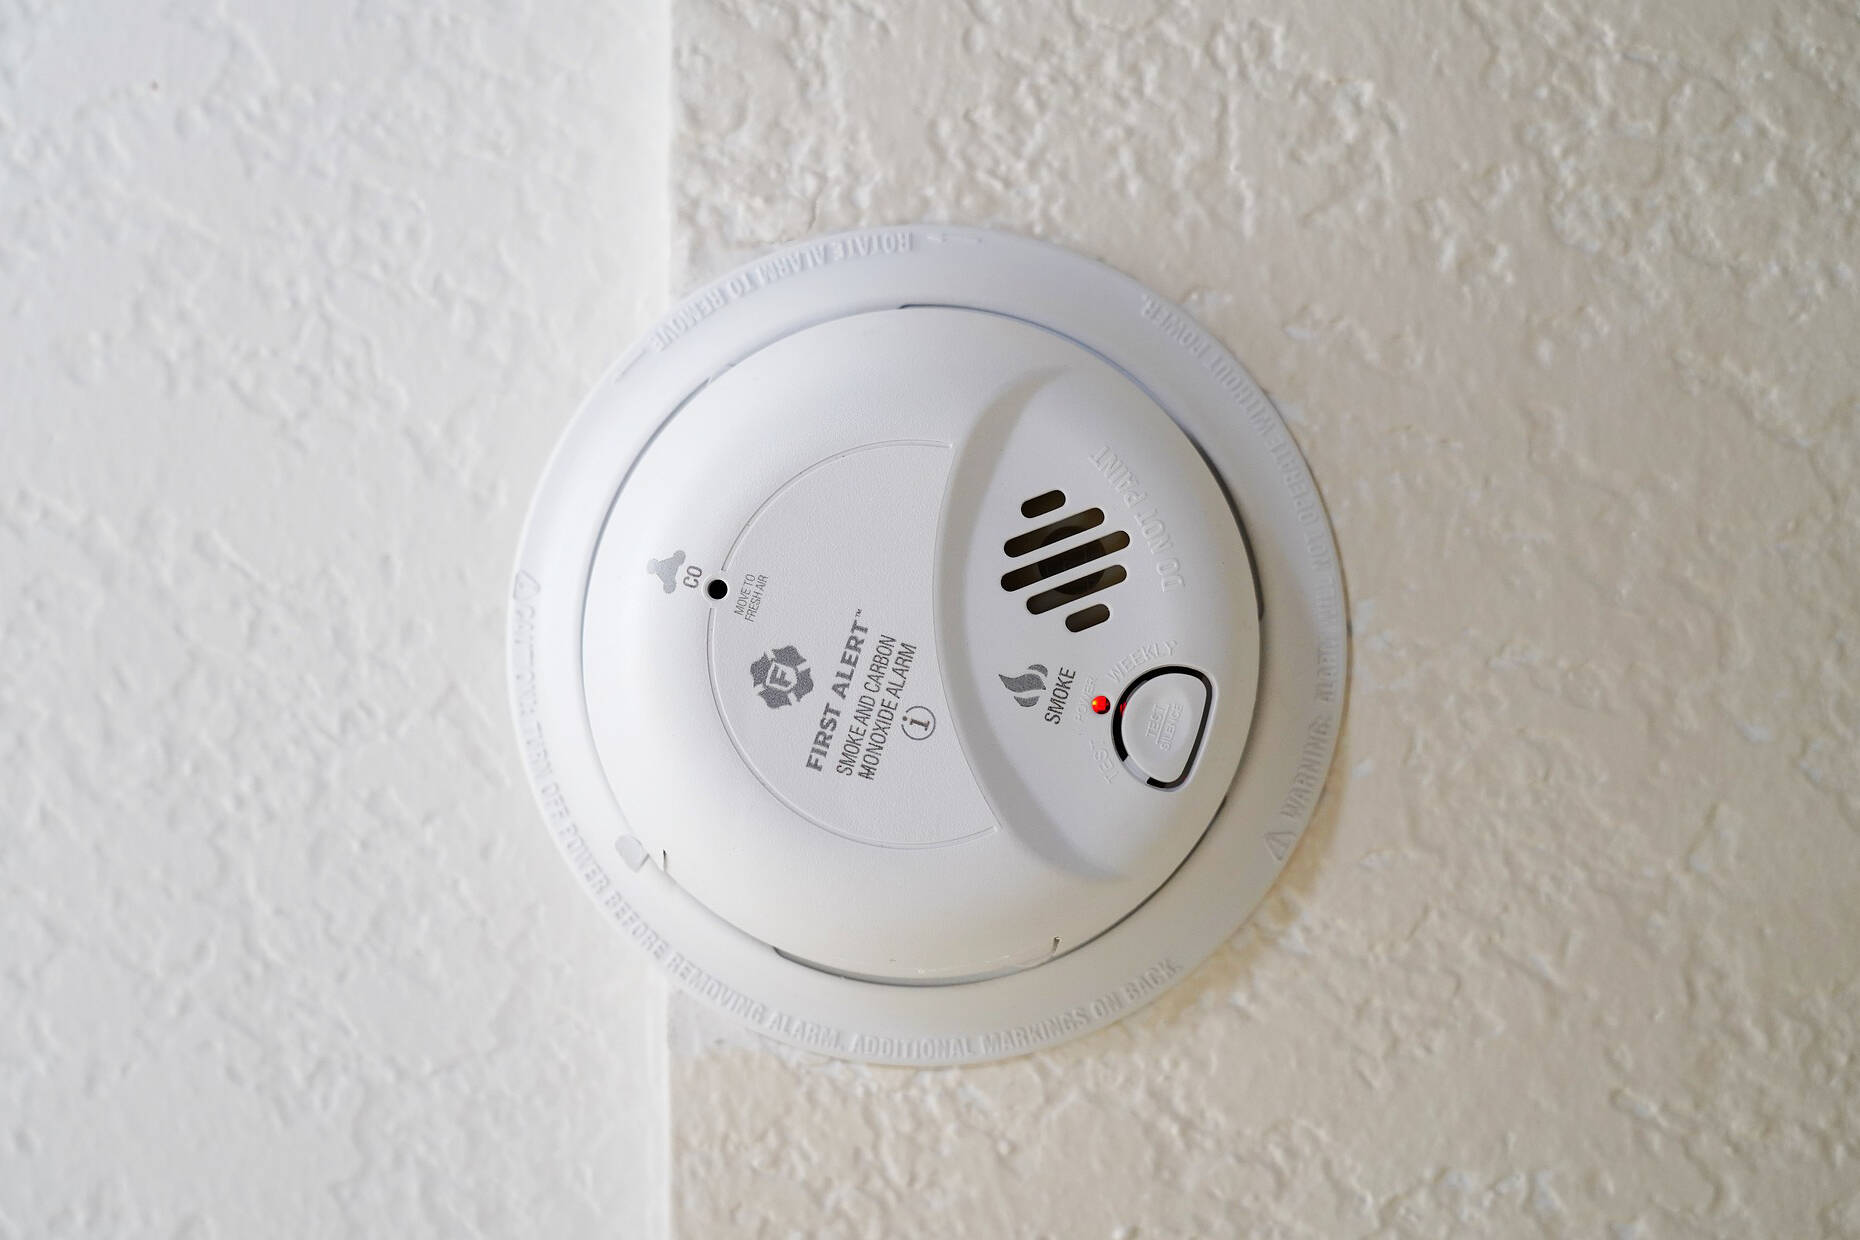 B.C.’s parliamentary secretary for emergency preparedness is reminding residents to check their carbon monoxide detectors ahead of the winter months, when most CO-poisonings occur. (Pixabay photo)